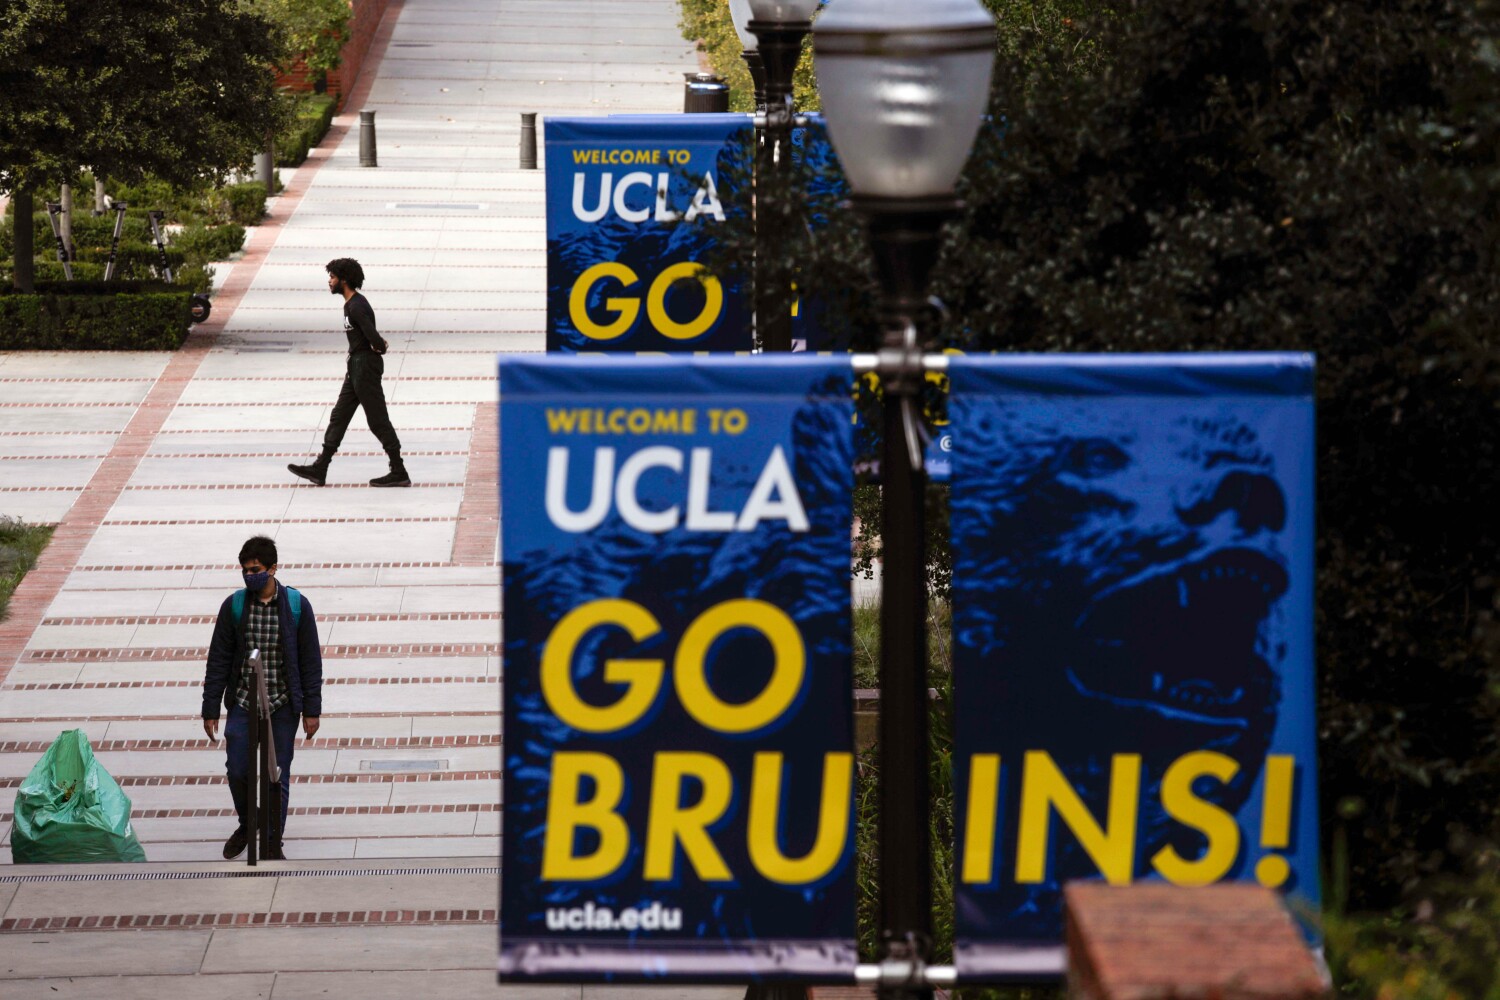 Federal authorities charge former UCLA lecturer with making violent threats